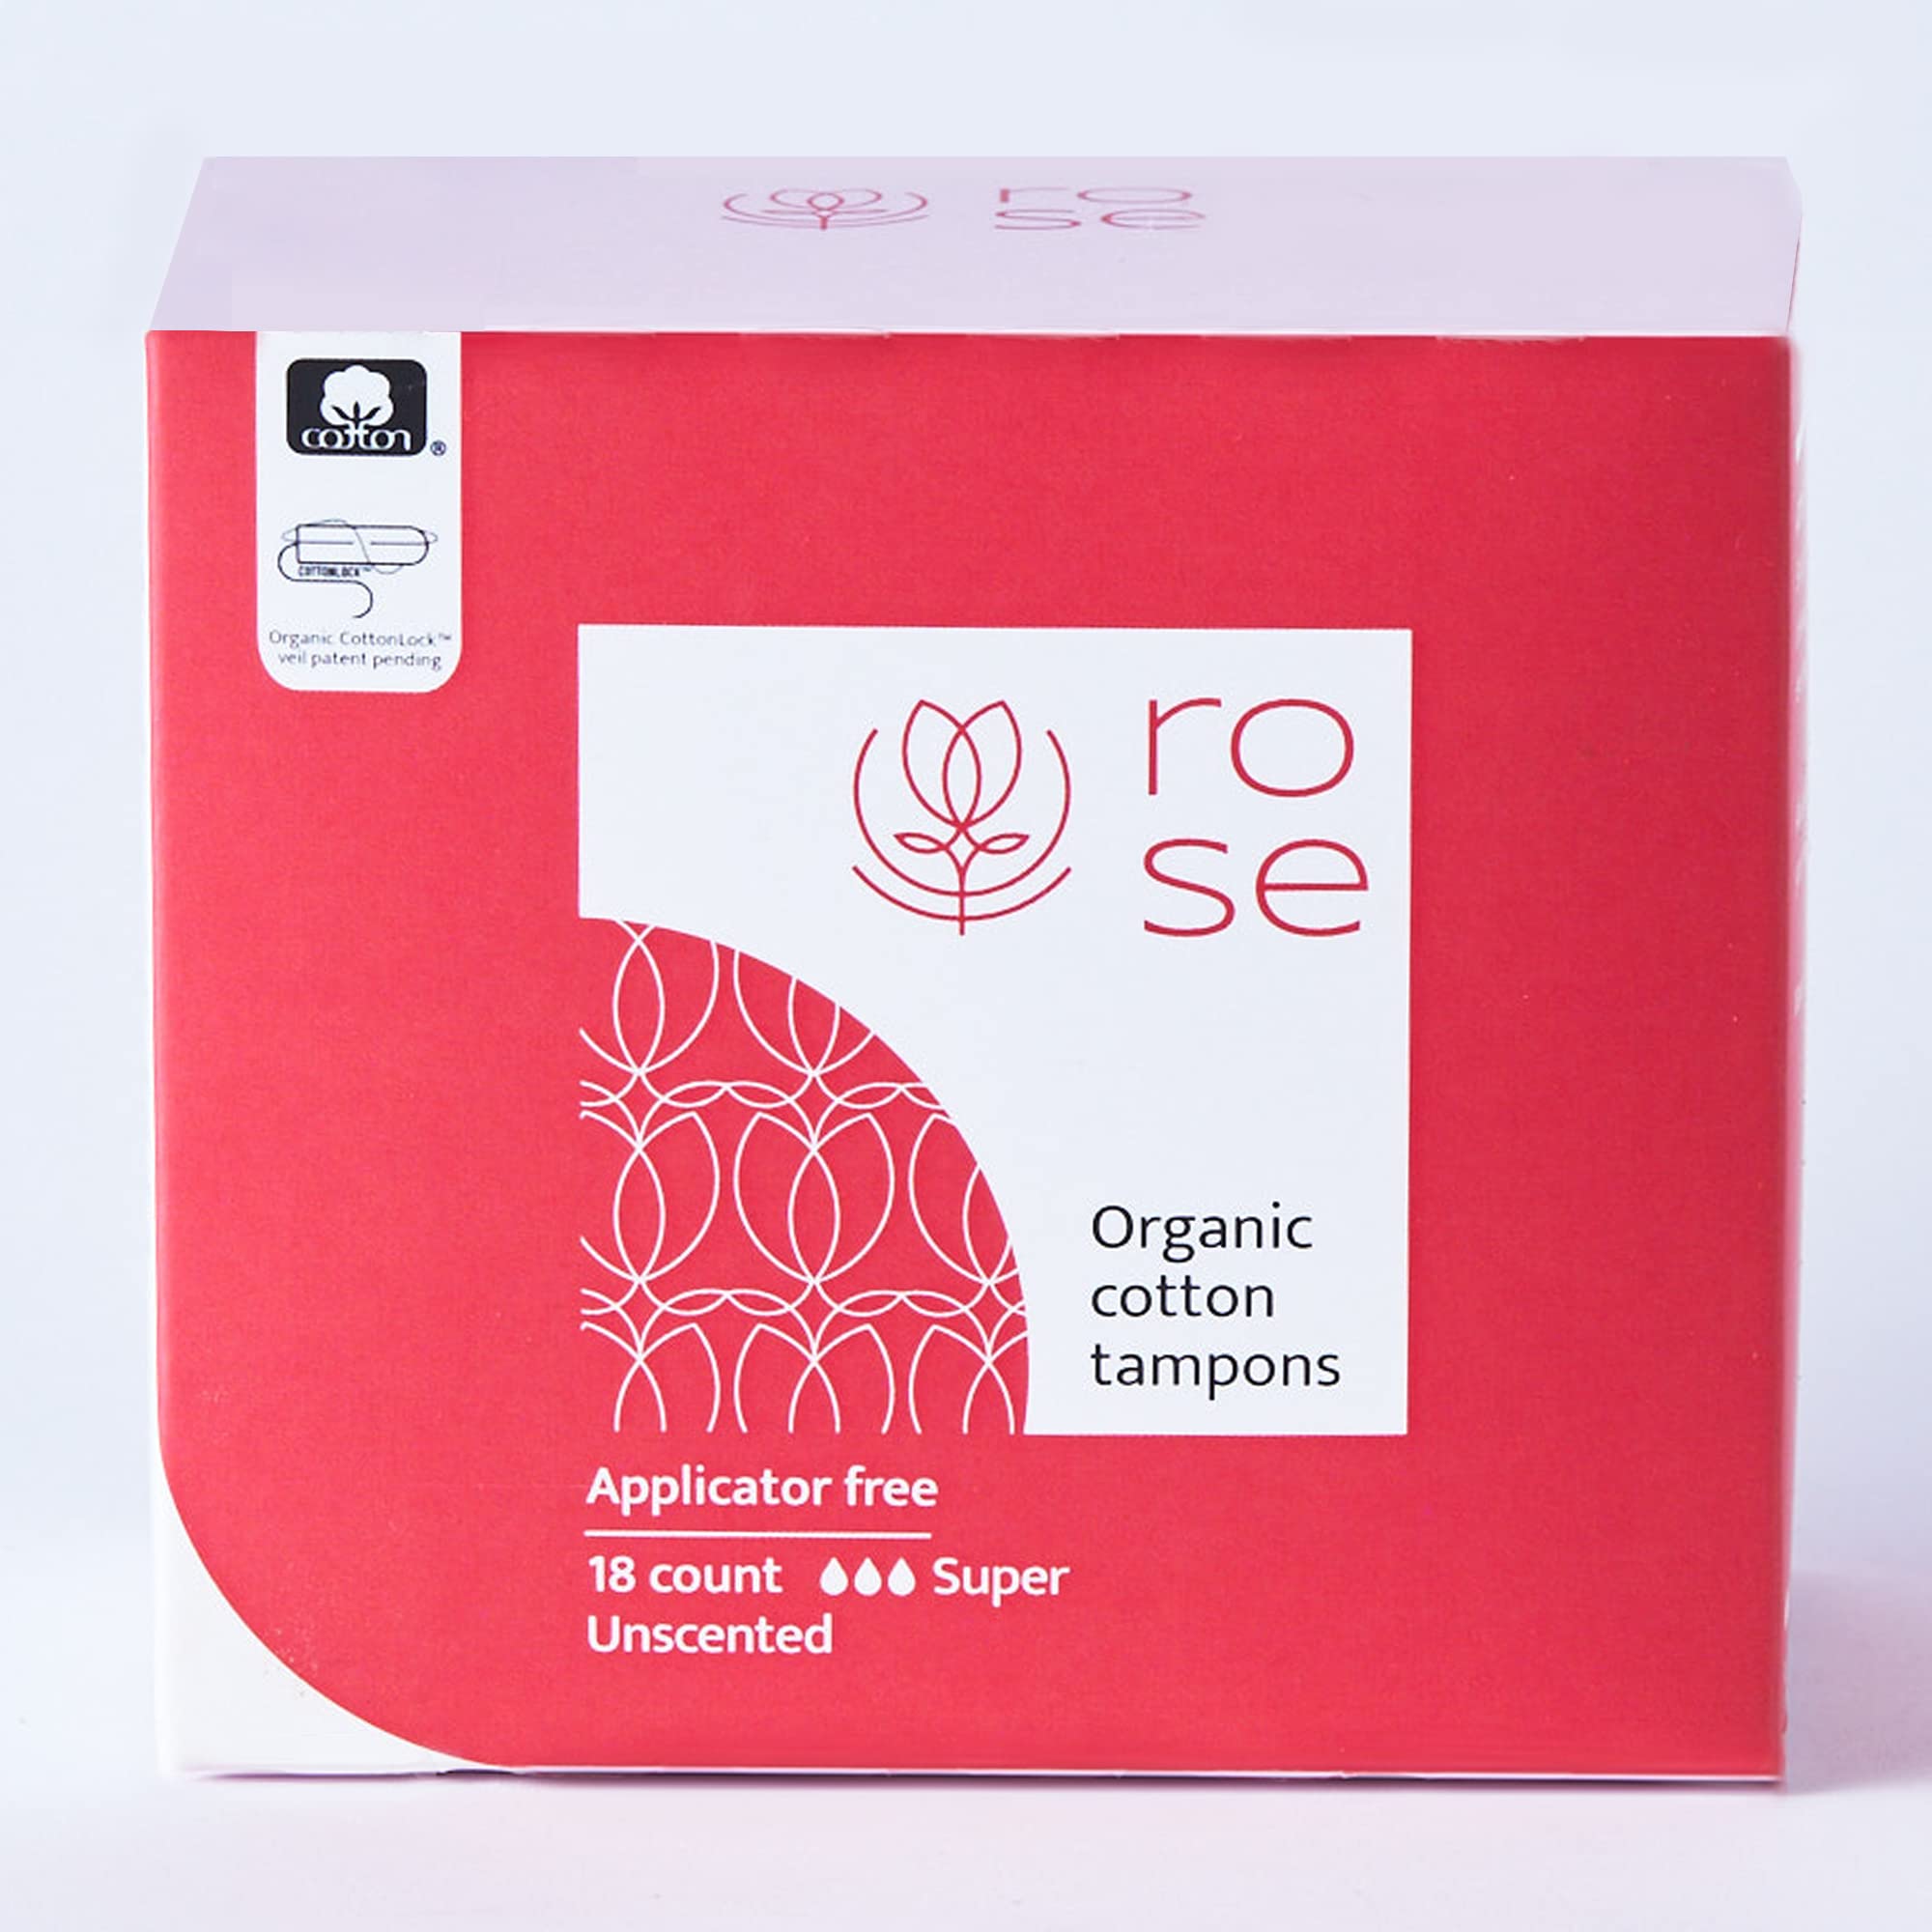 ROSE Certified Organic Cotton Non-Applicator Tampons Super Absorbency, Cotton Lock Security Veil Patent System, Hypoallergenic, Non-Toxic